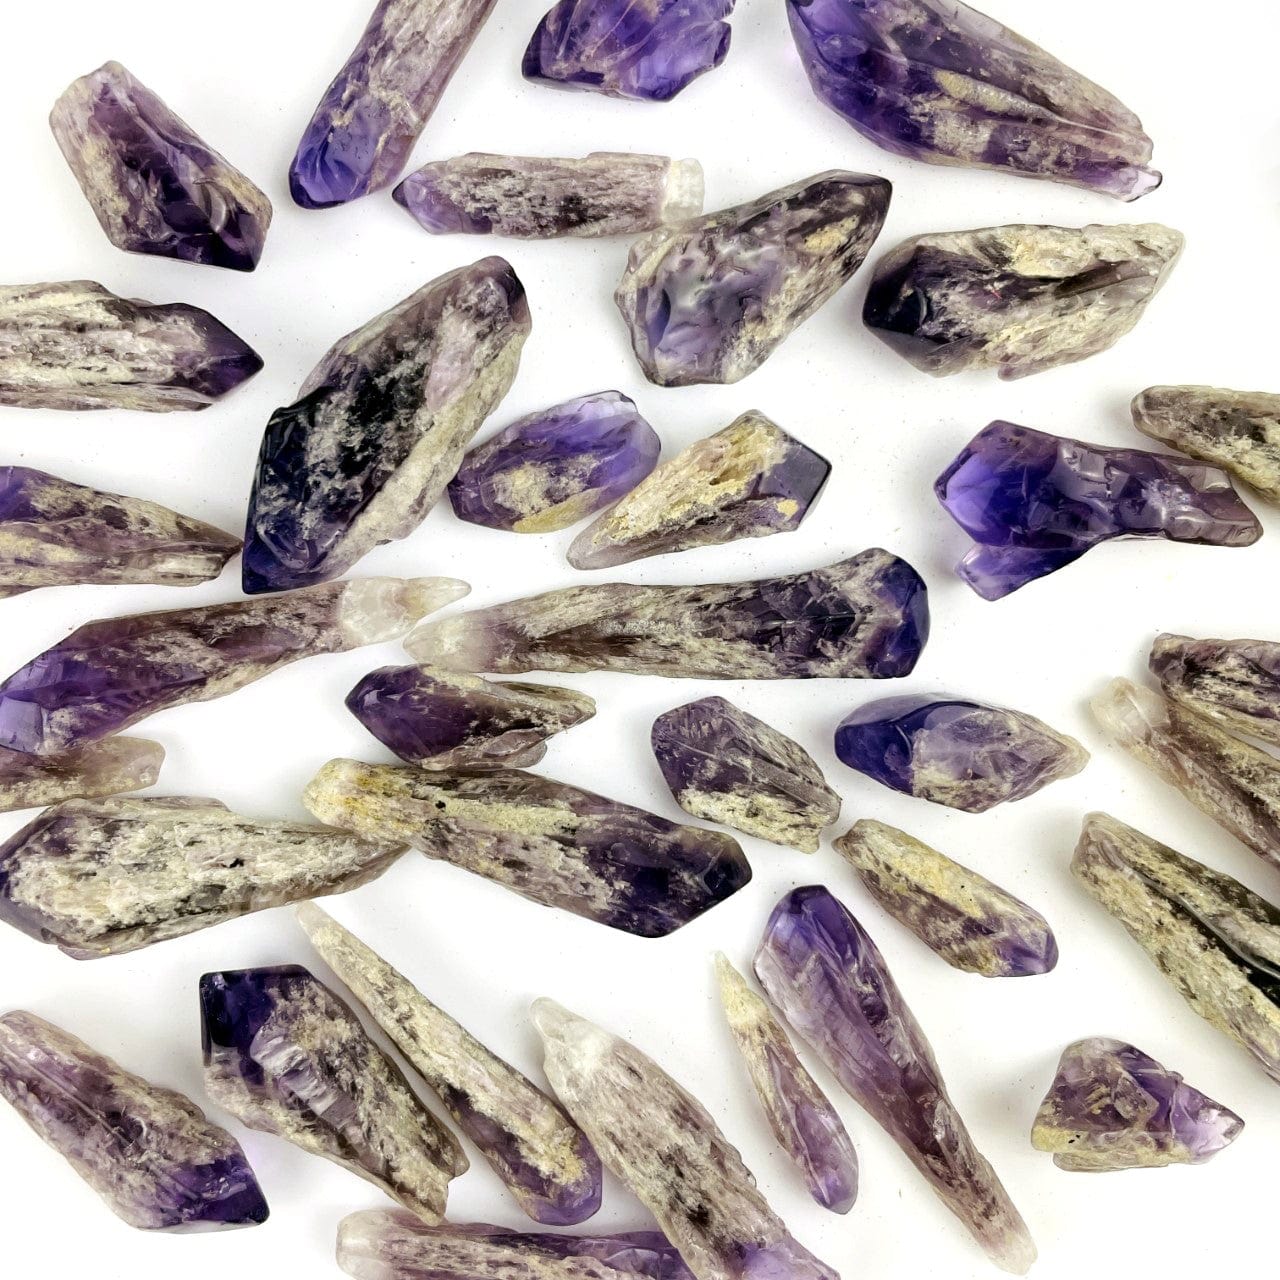 Elestial Amethyst Point - 1 Pound Bag shown spread out on a table